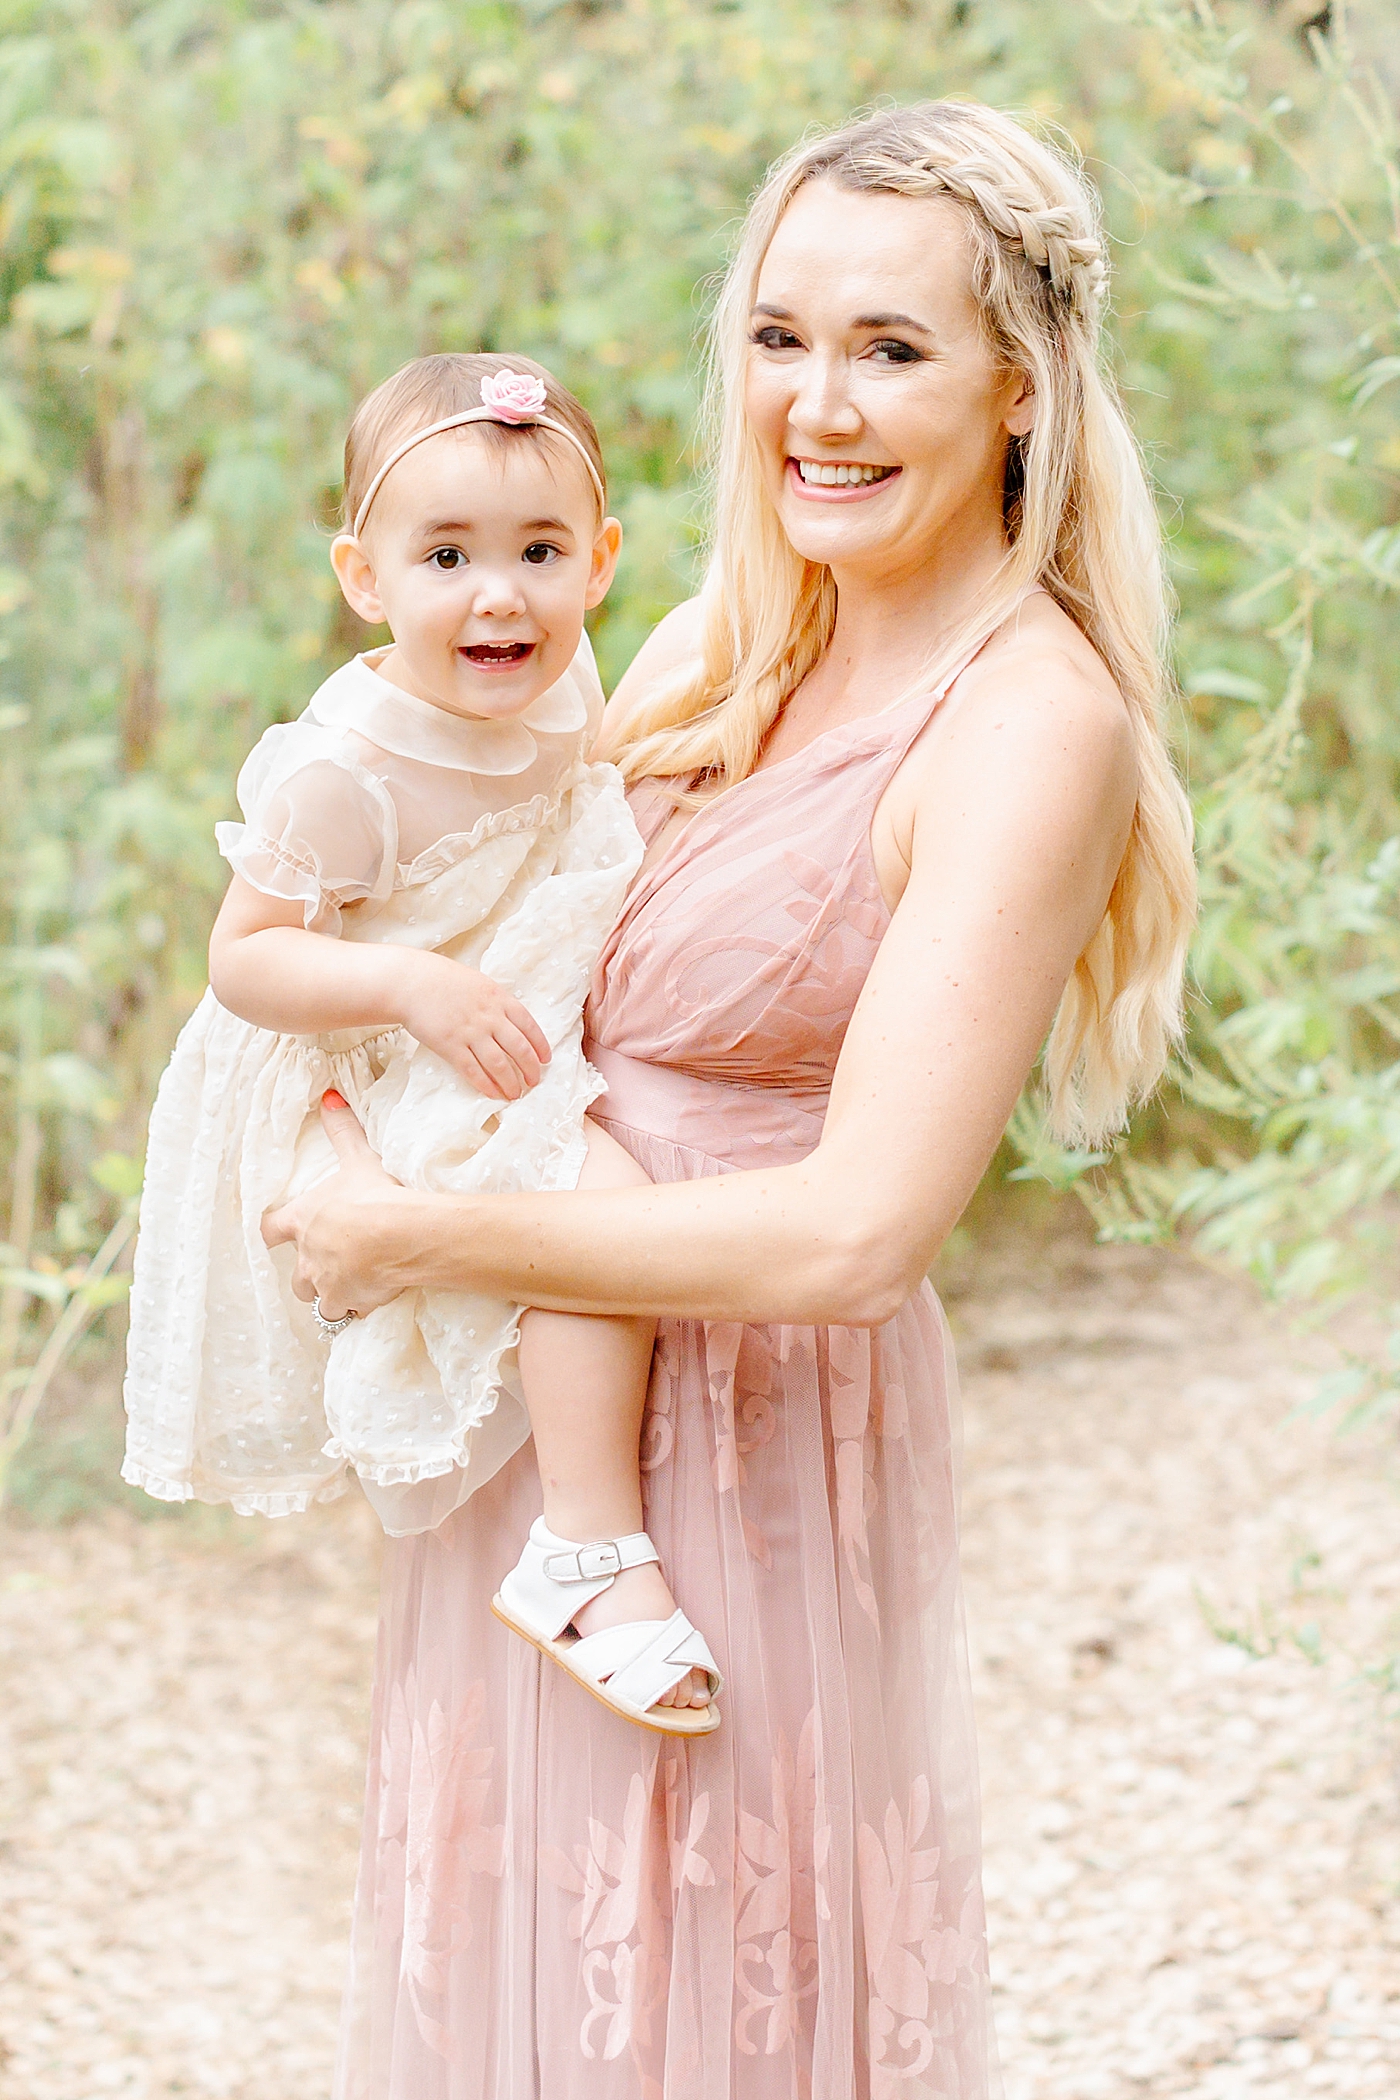 Mom holding her baby girl | Outdoor Family Sessions with Sana Ahmed Photography